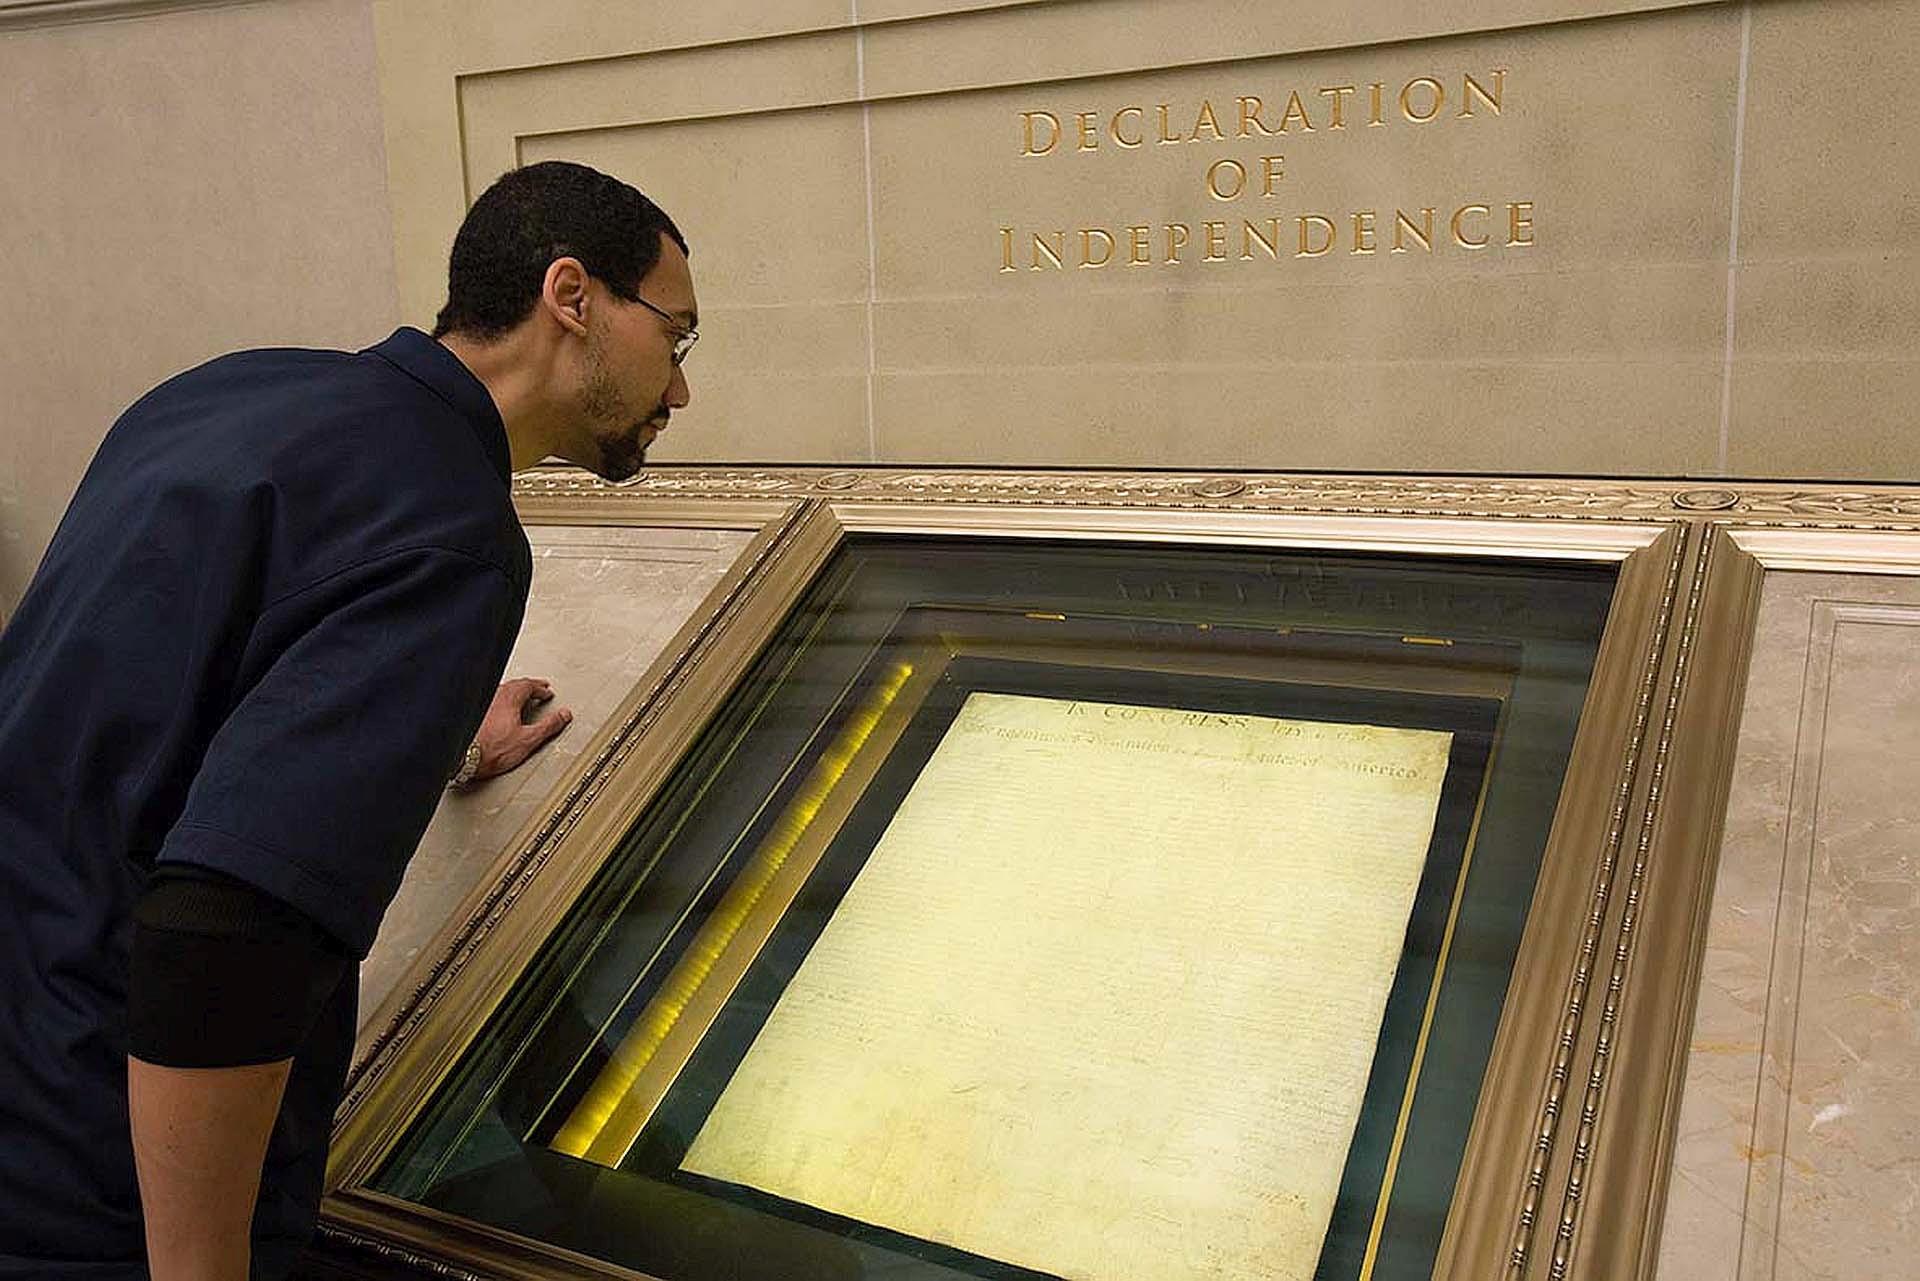 declaration-of-independence-constitution-of-u-s-framed-the-bill-of